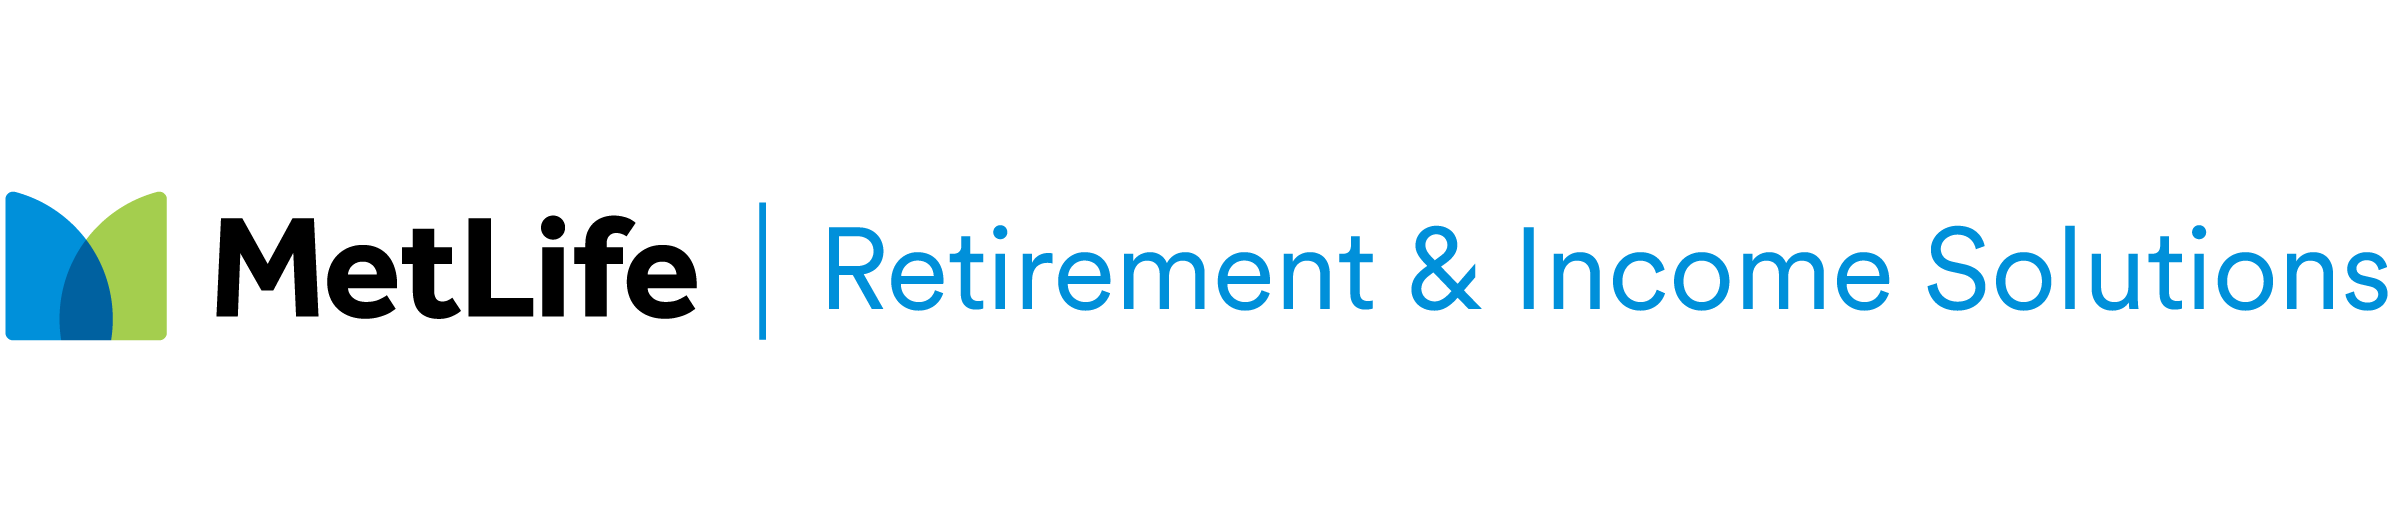 MetLife Retirement & Income Solutions